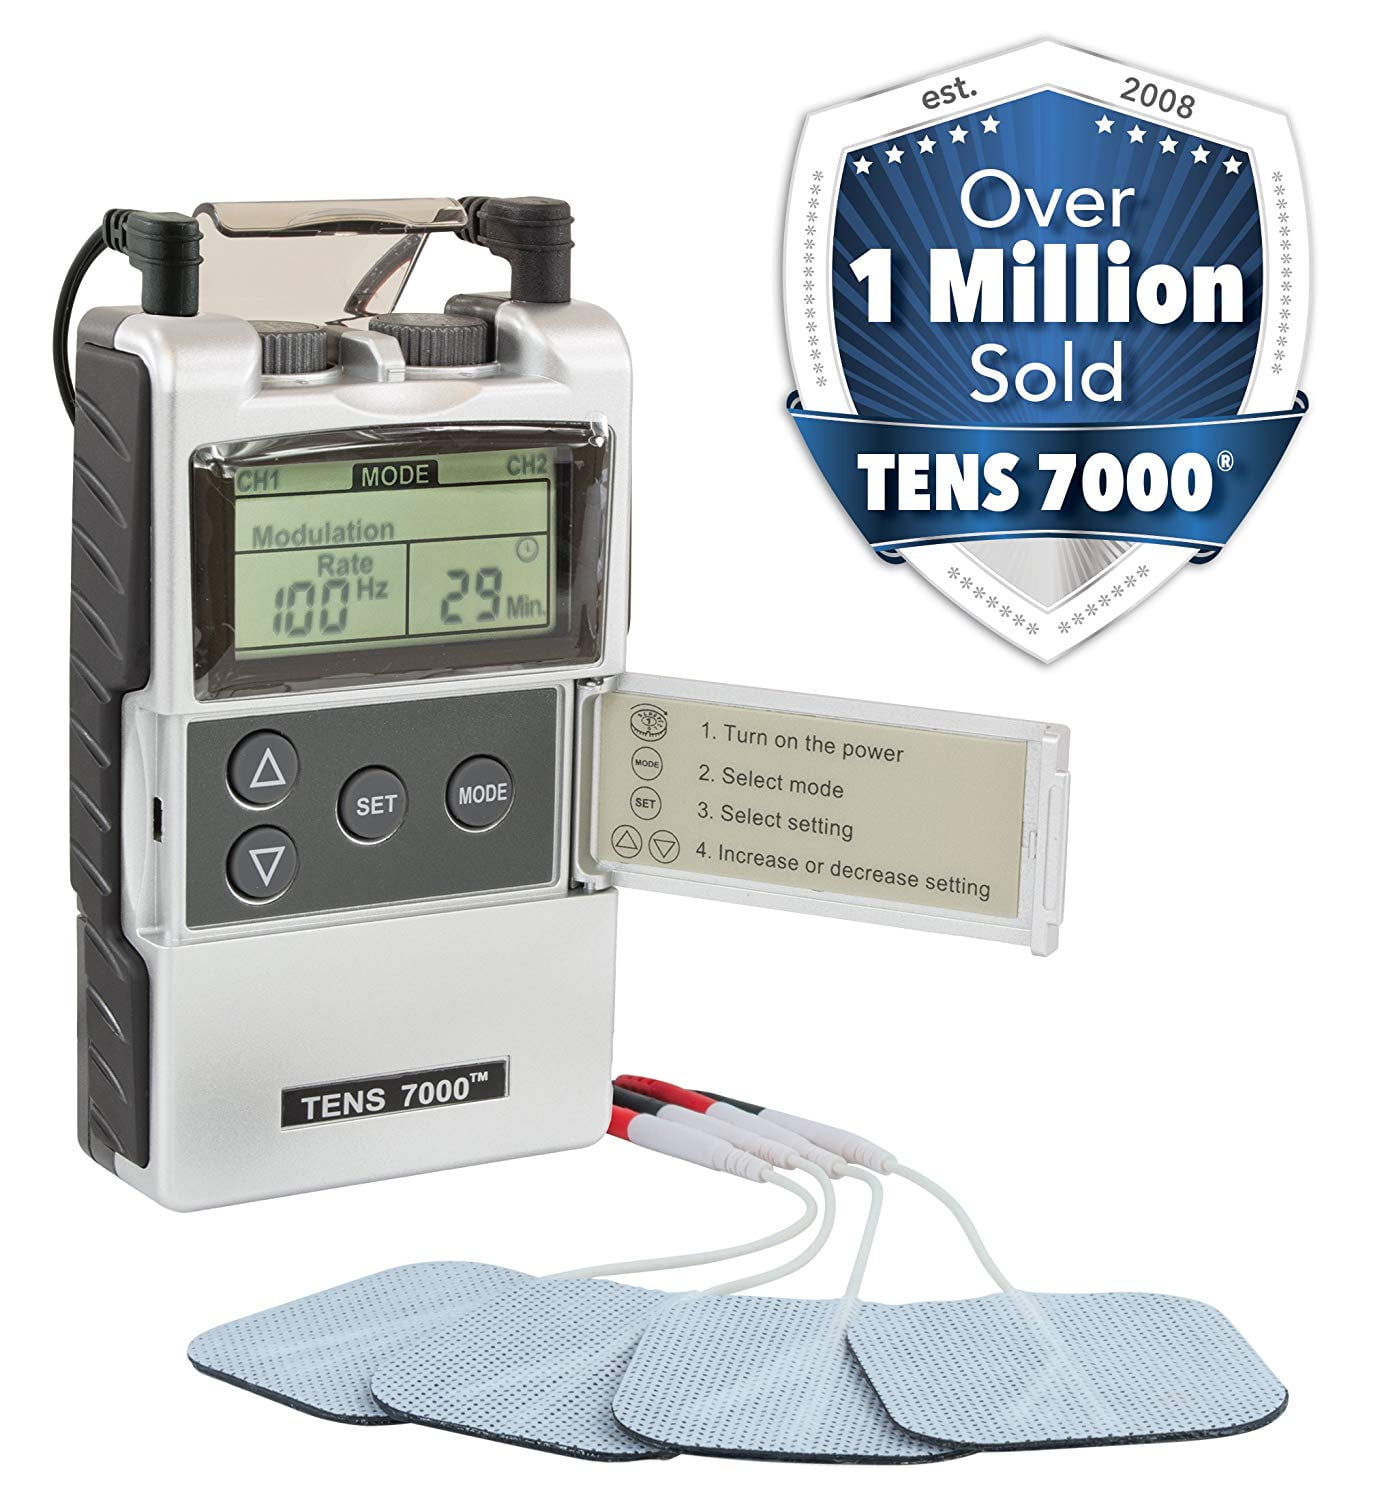  TENS 7000 Digital TENS Unit with Accessories - TENS